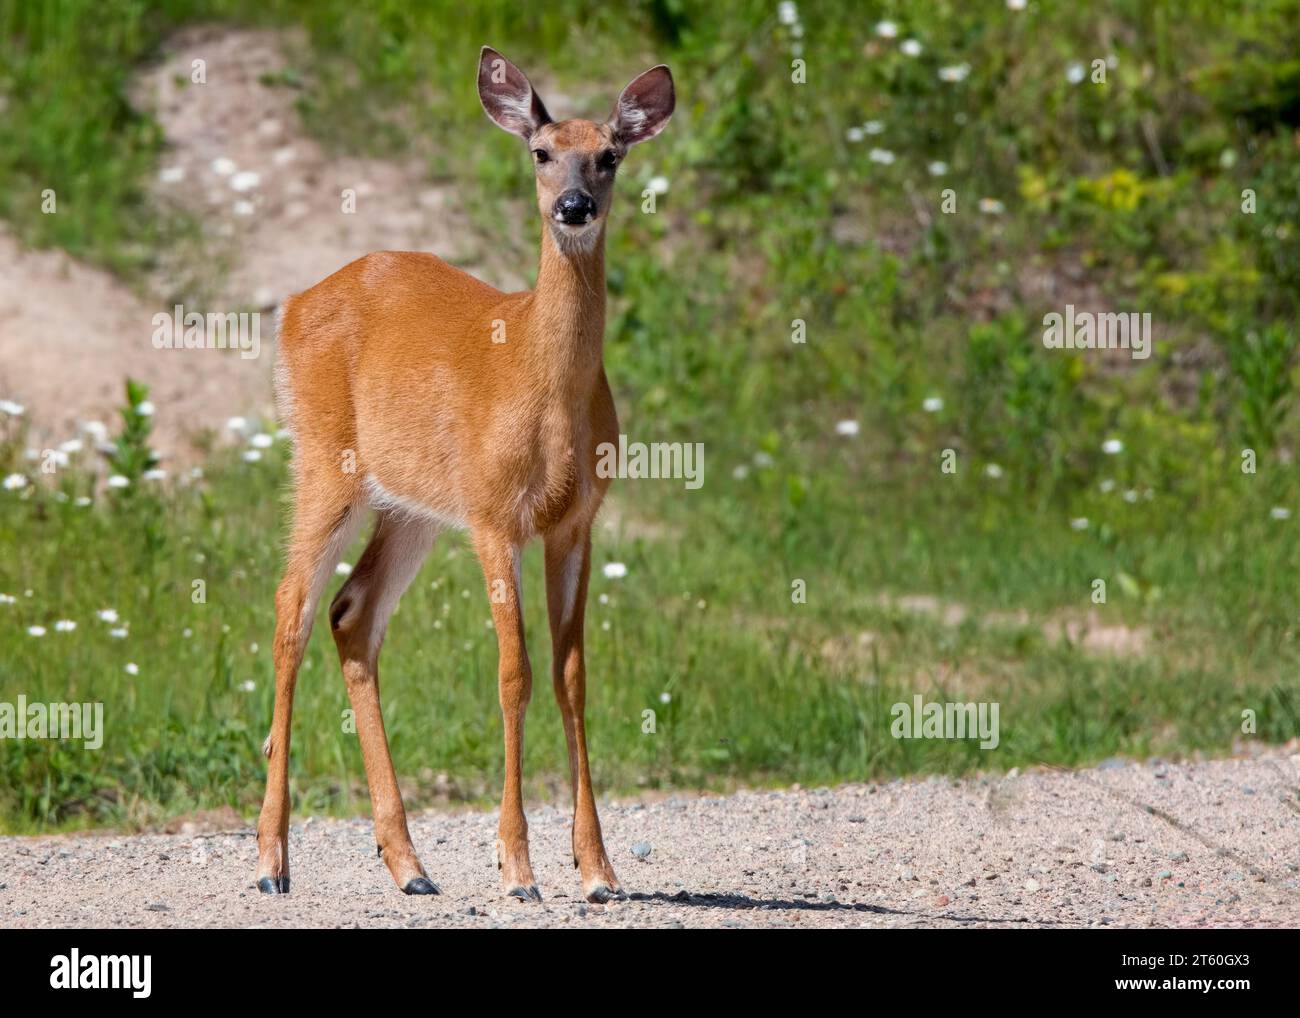 Pretty young Whitetail doe deer (Odocoileus virginianus) posing on a gravel road in the Chippewa National Forest in northern Minnesota USA Stock Photo